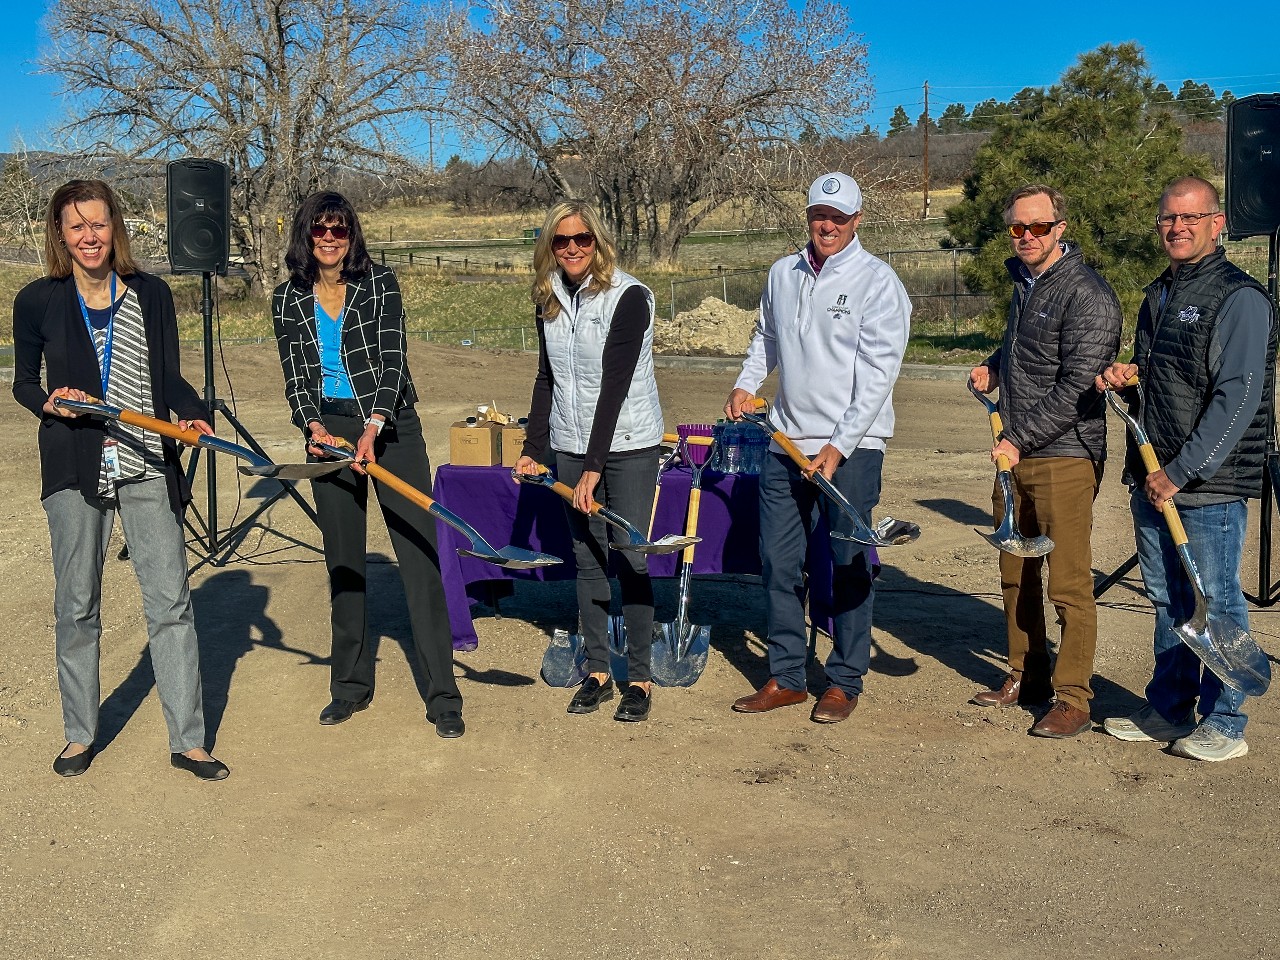 D20 leadership, Discovery Canyon Campus High School staff, and donors break ground on new field house